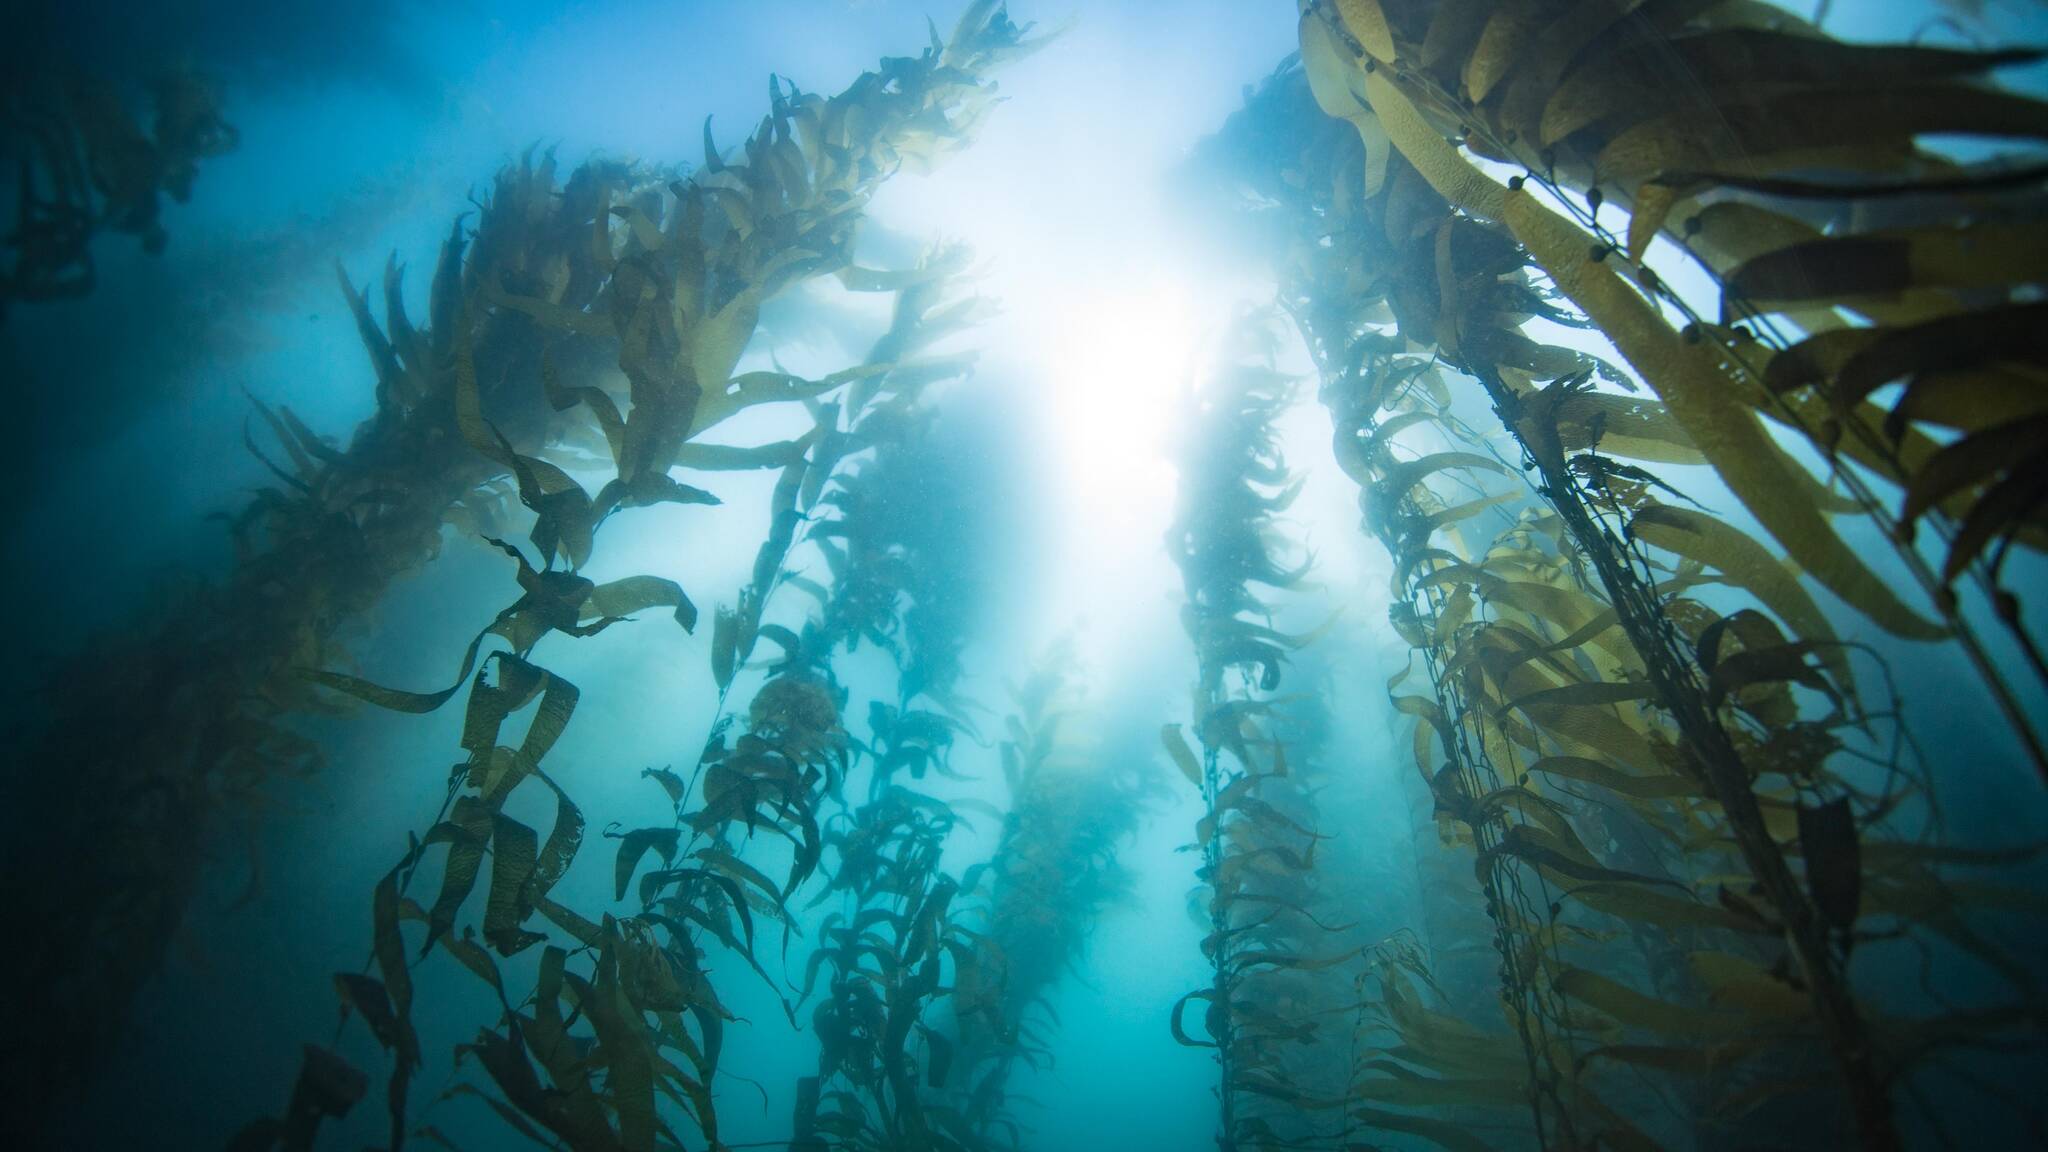 This photo available under a Creative Commons license shows a kelp forest. (Camille Pagniello)